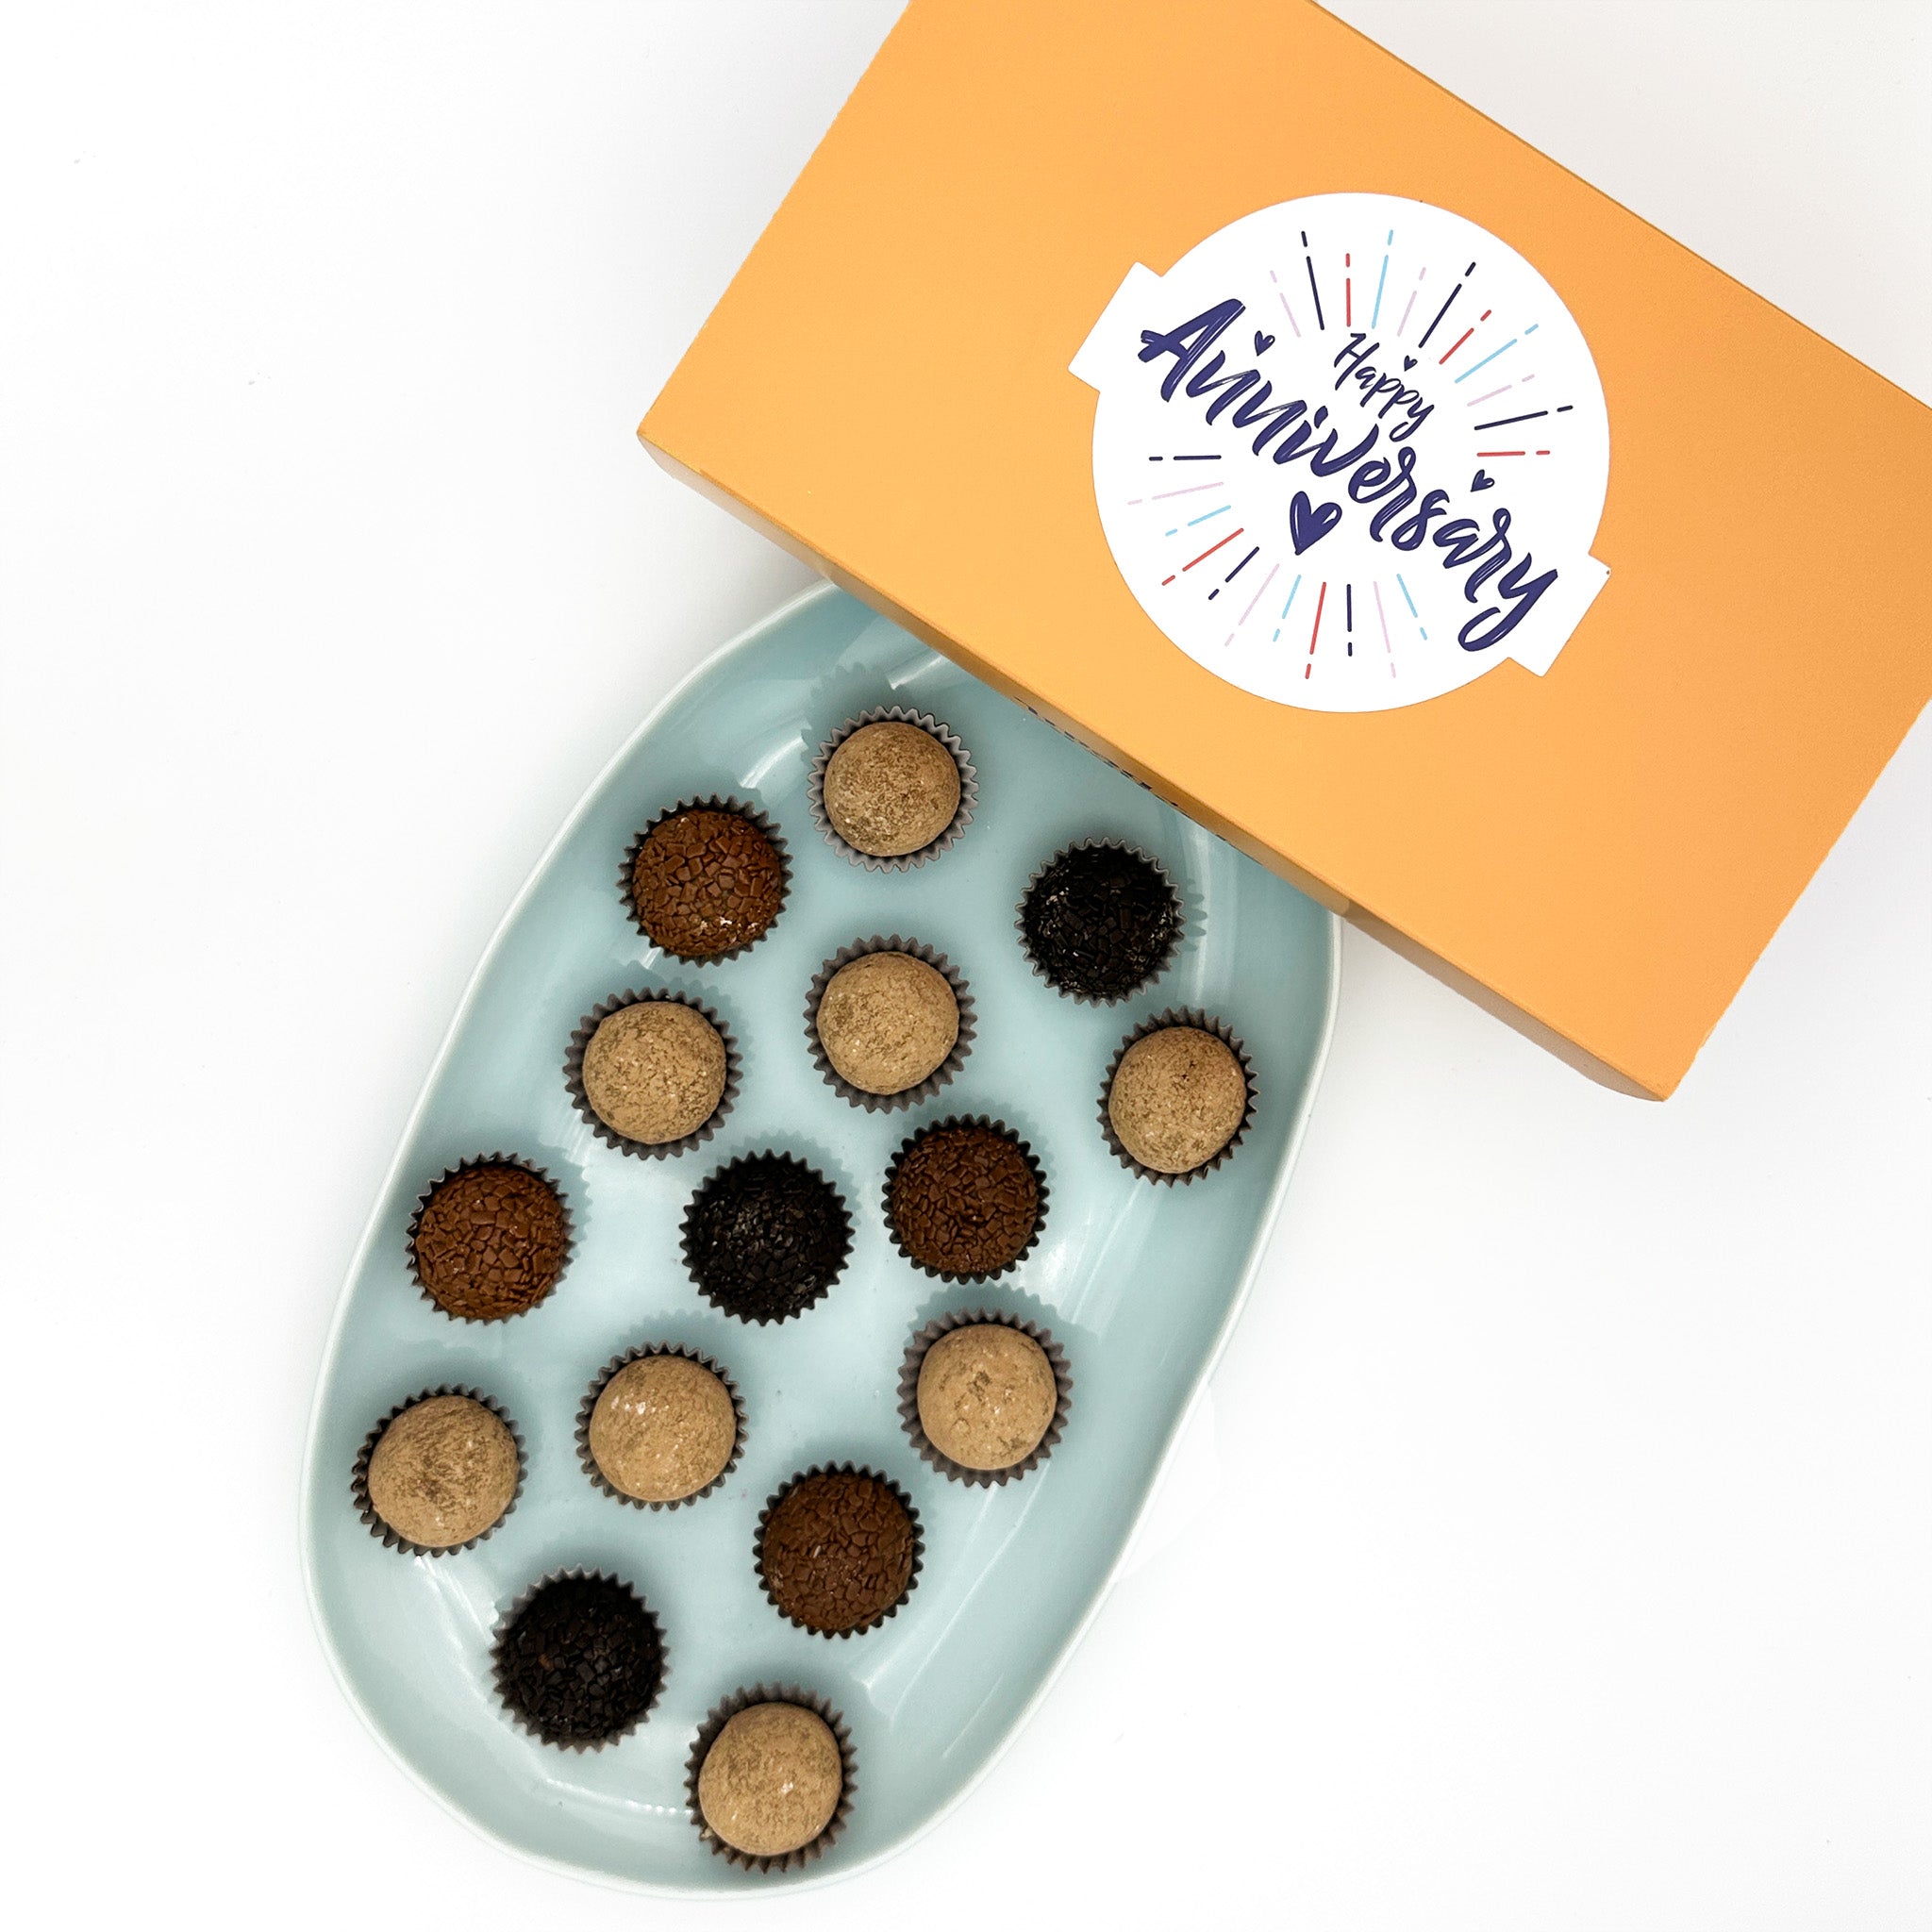 An exquisite box of Anniversary Coffee + Chocolate Brigadeiros, perfect for celebrating an anniversary.